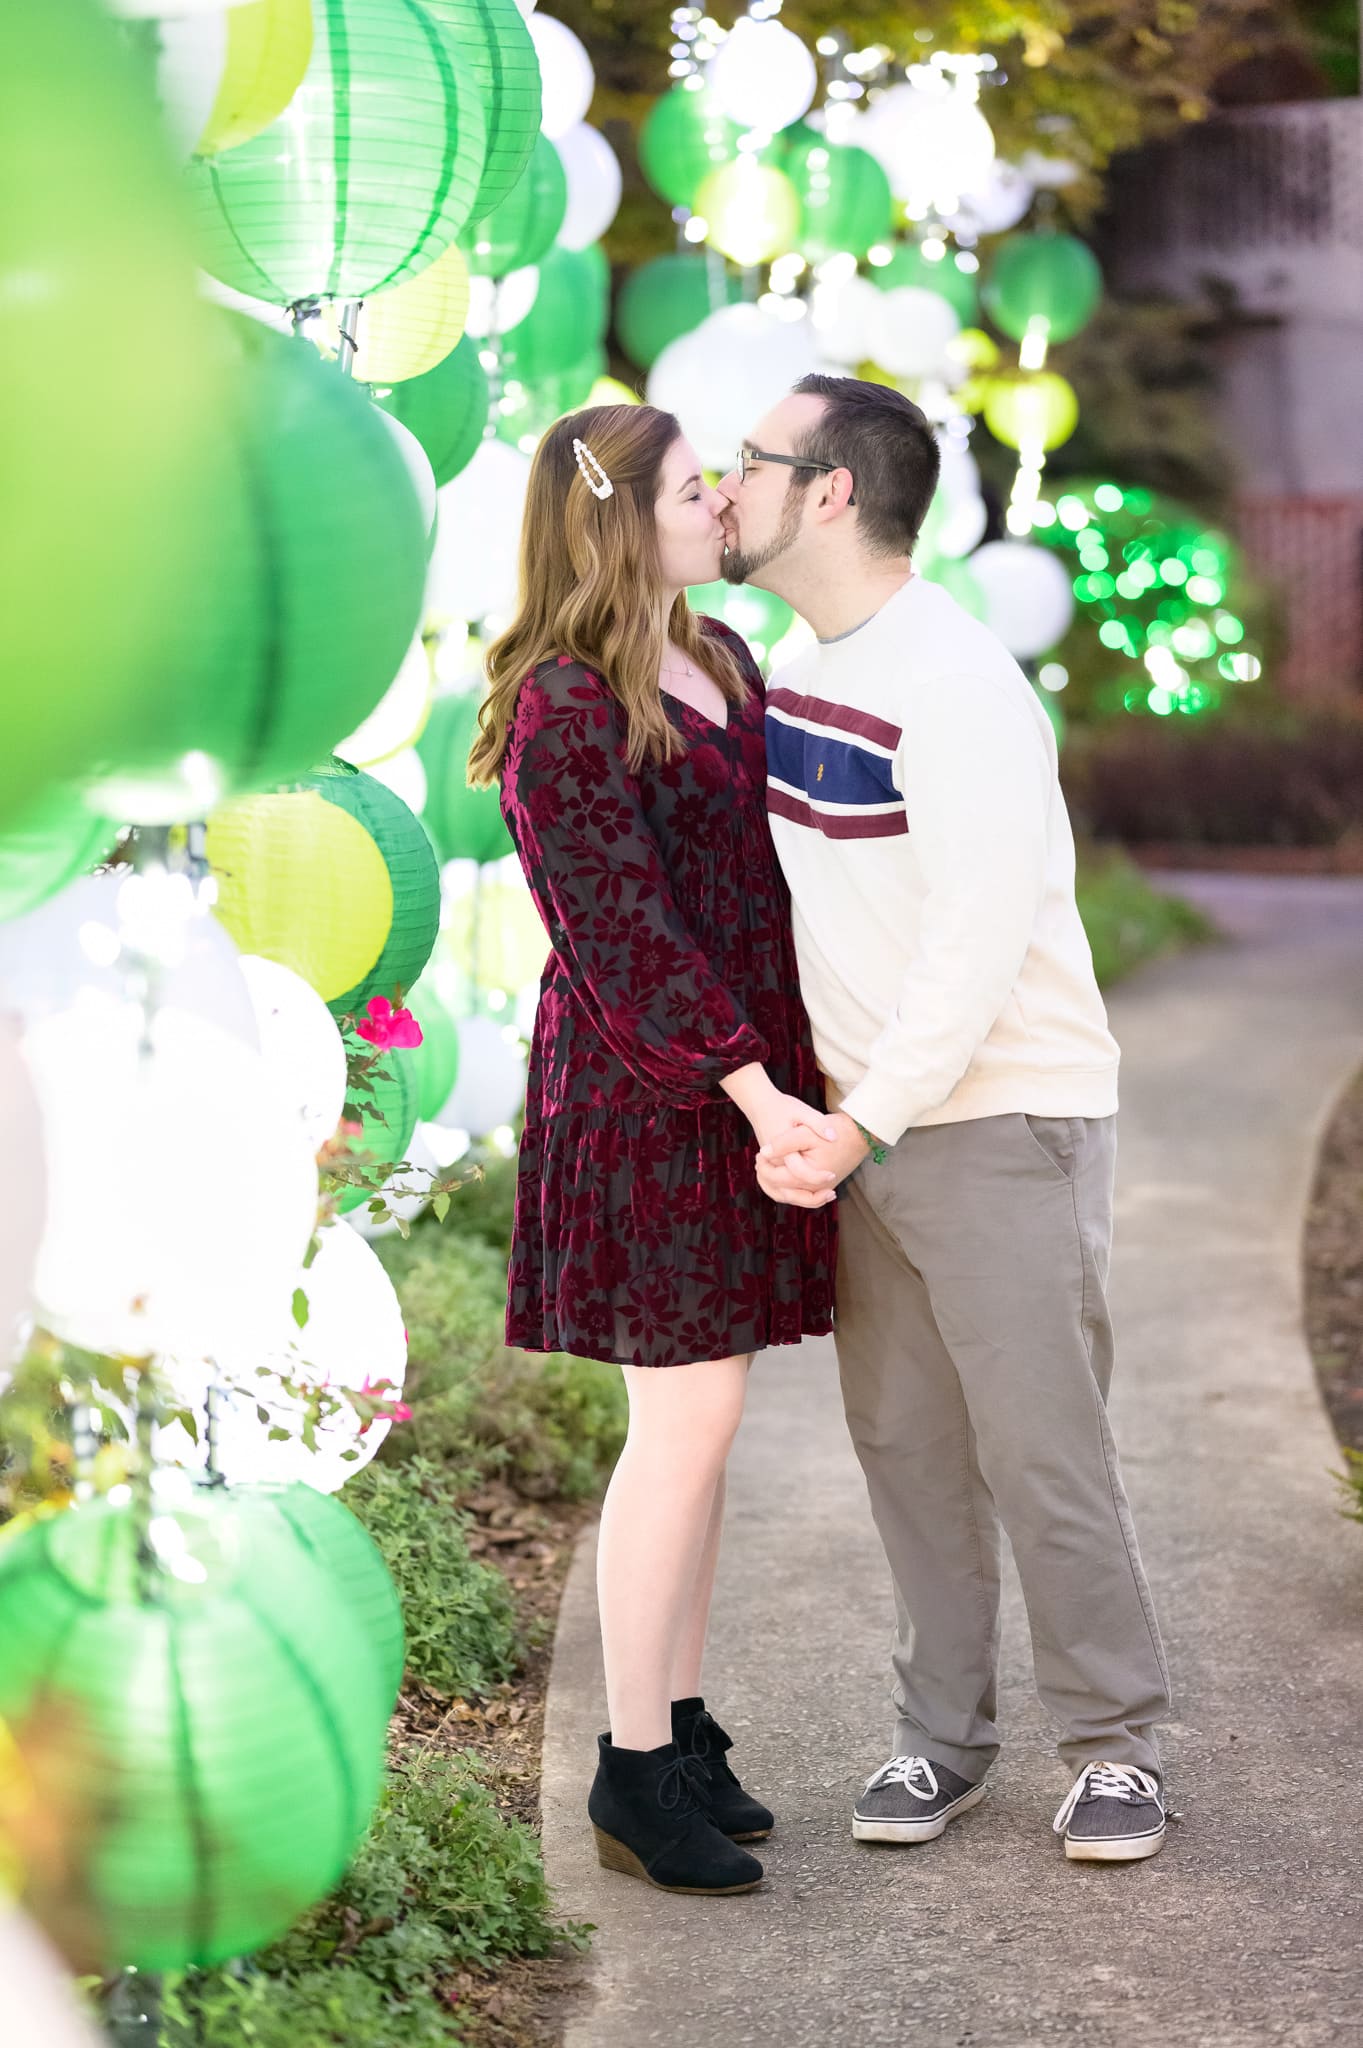 Cute engagement portraits with the colorful lanterns during the Night of a Thousand Candles - Brookgreen Gardens